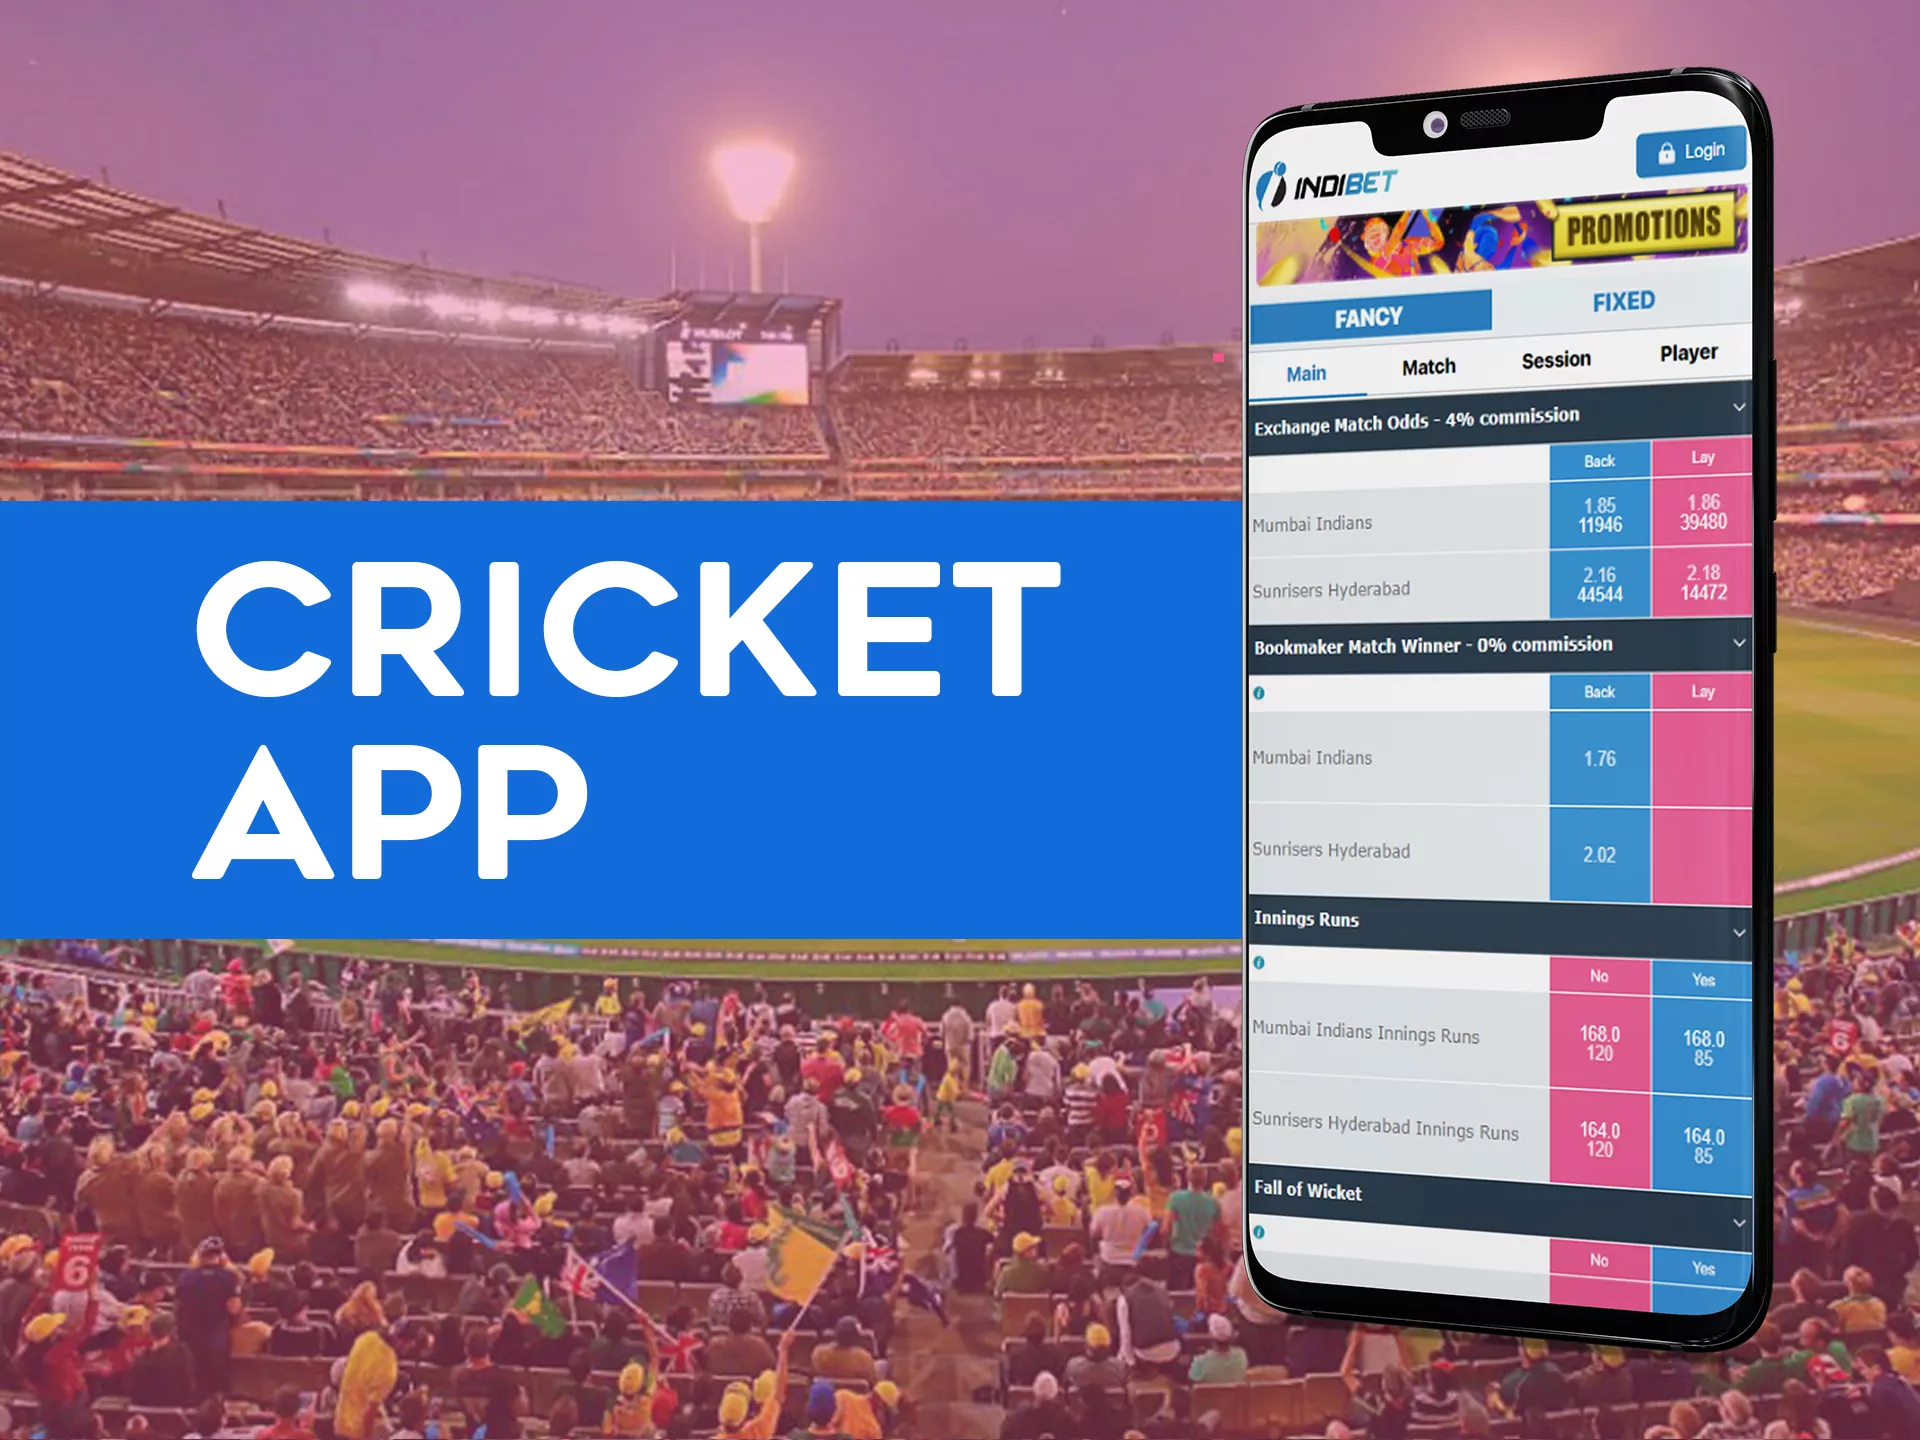 You can find all the cricket leagues you need in the Indibet app.